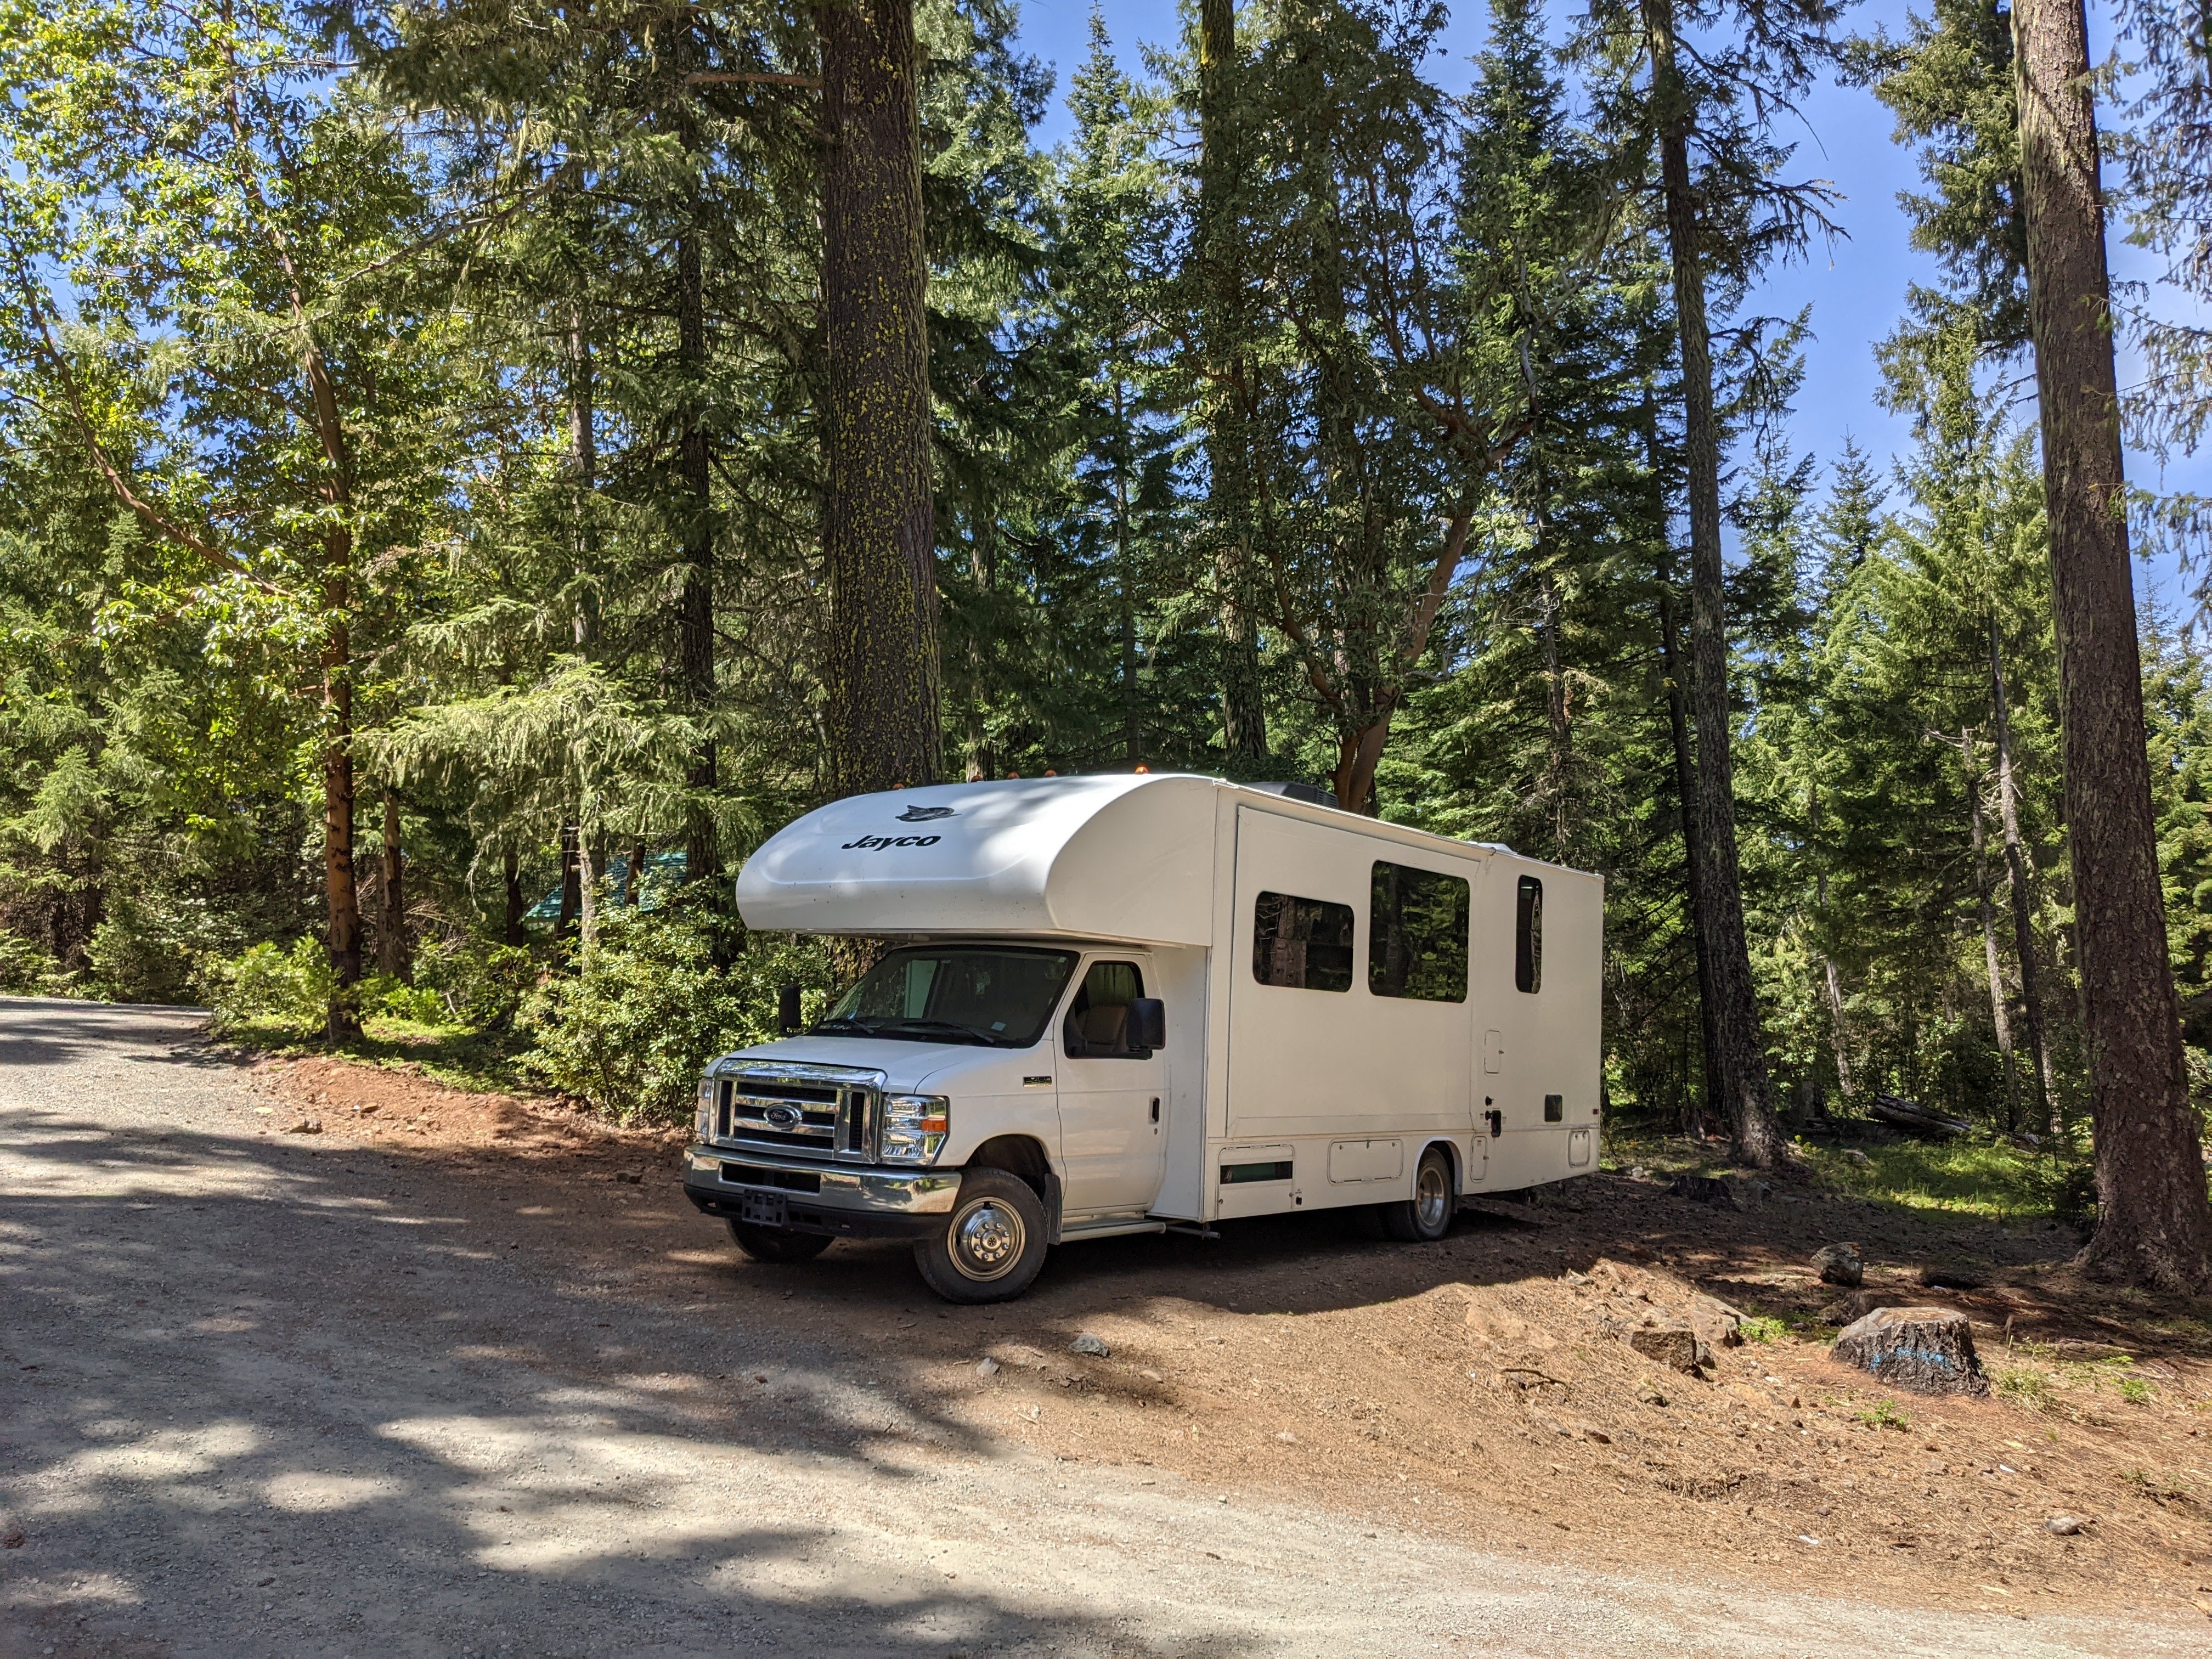 Camper submitted image from Burma Pond BLM - 5